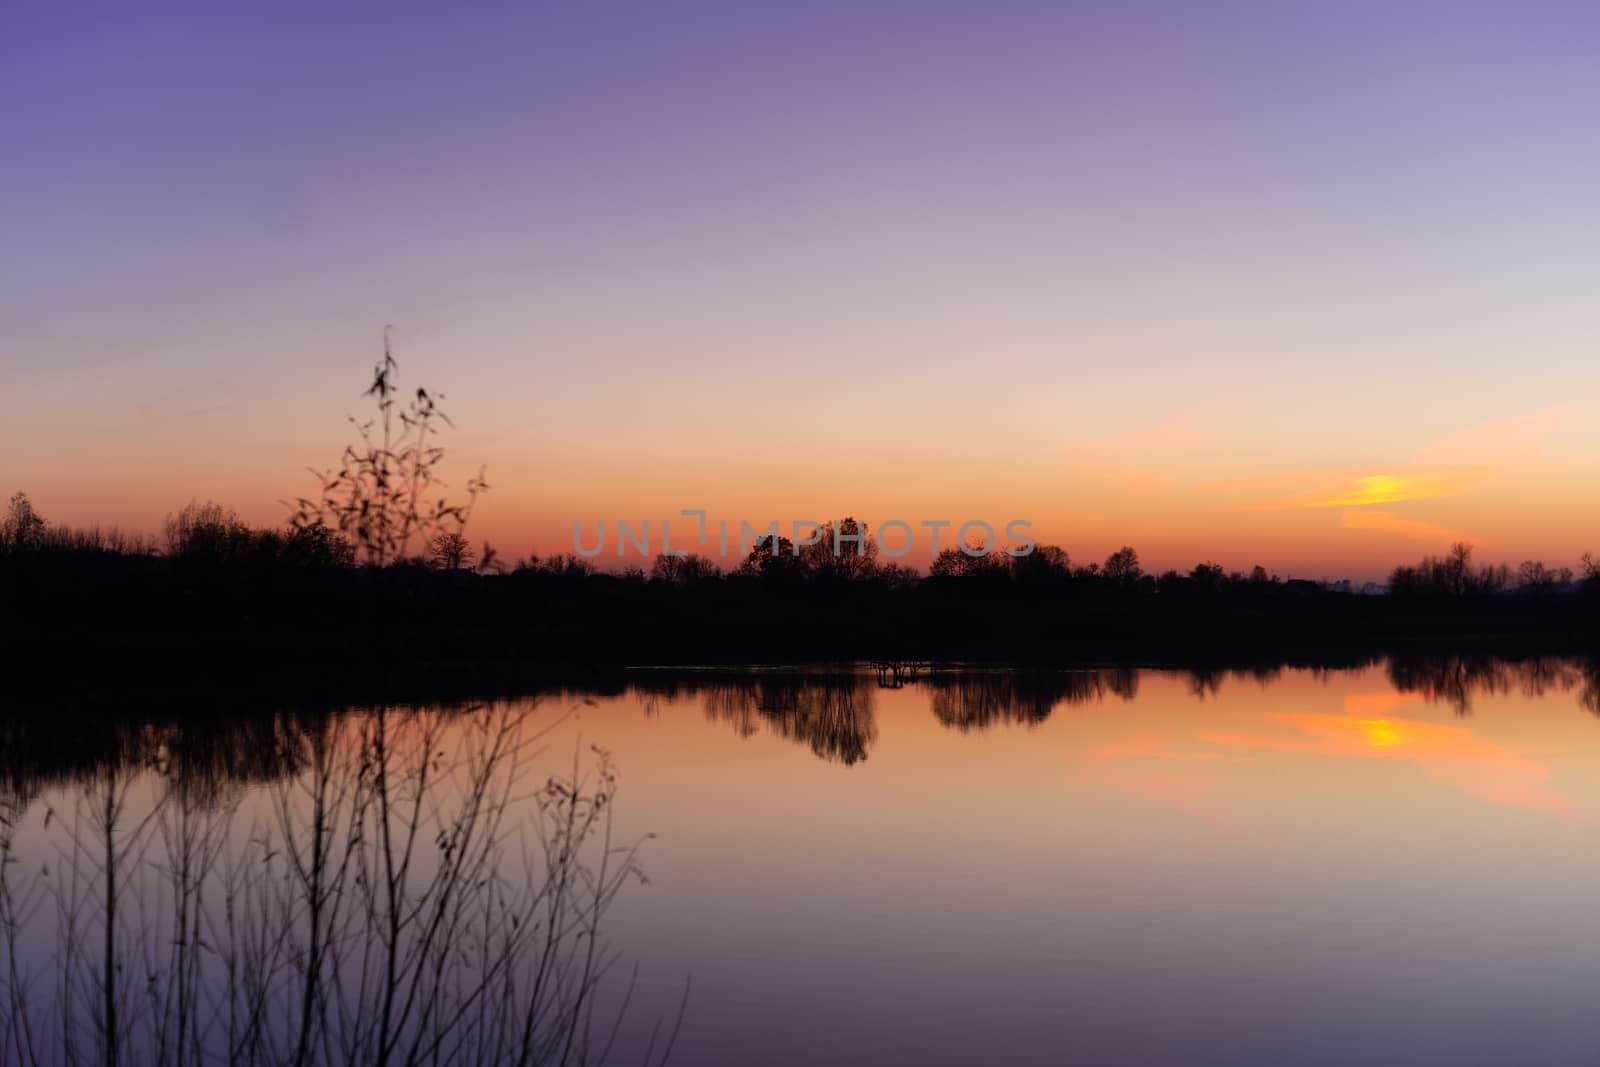 Blue time evening sky landscape with trees and lake in foreground. Blue time sunset. Perfect teal and orange colors. Low-light underexposed photo. by alexsdriver